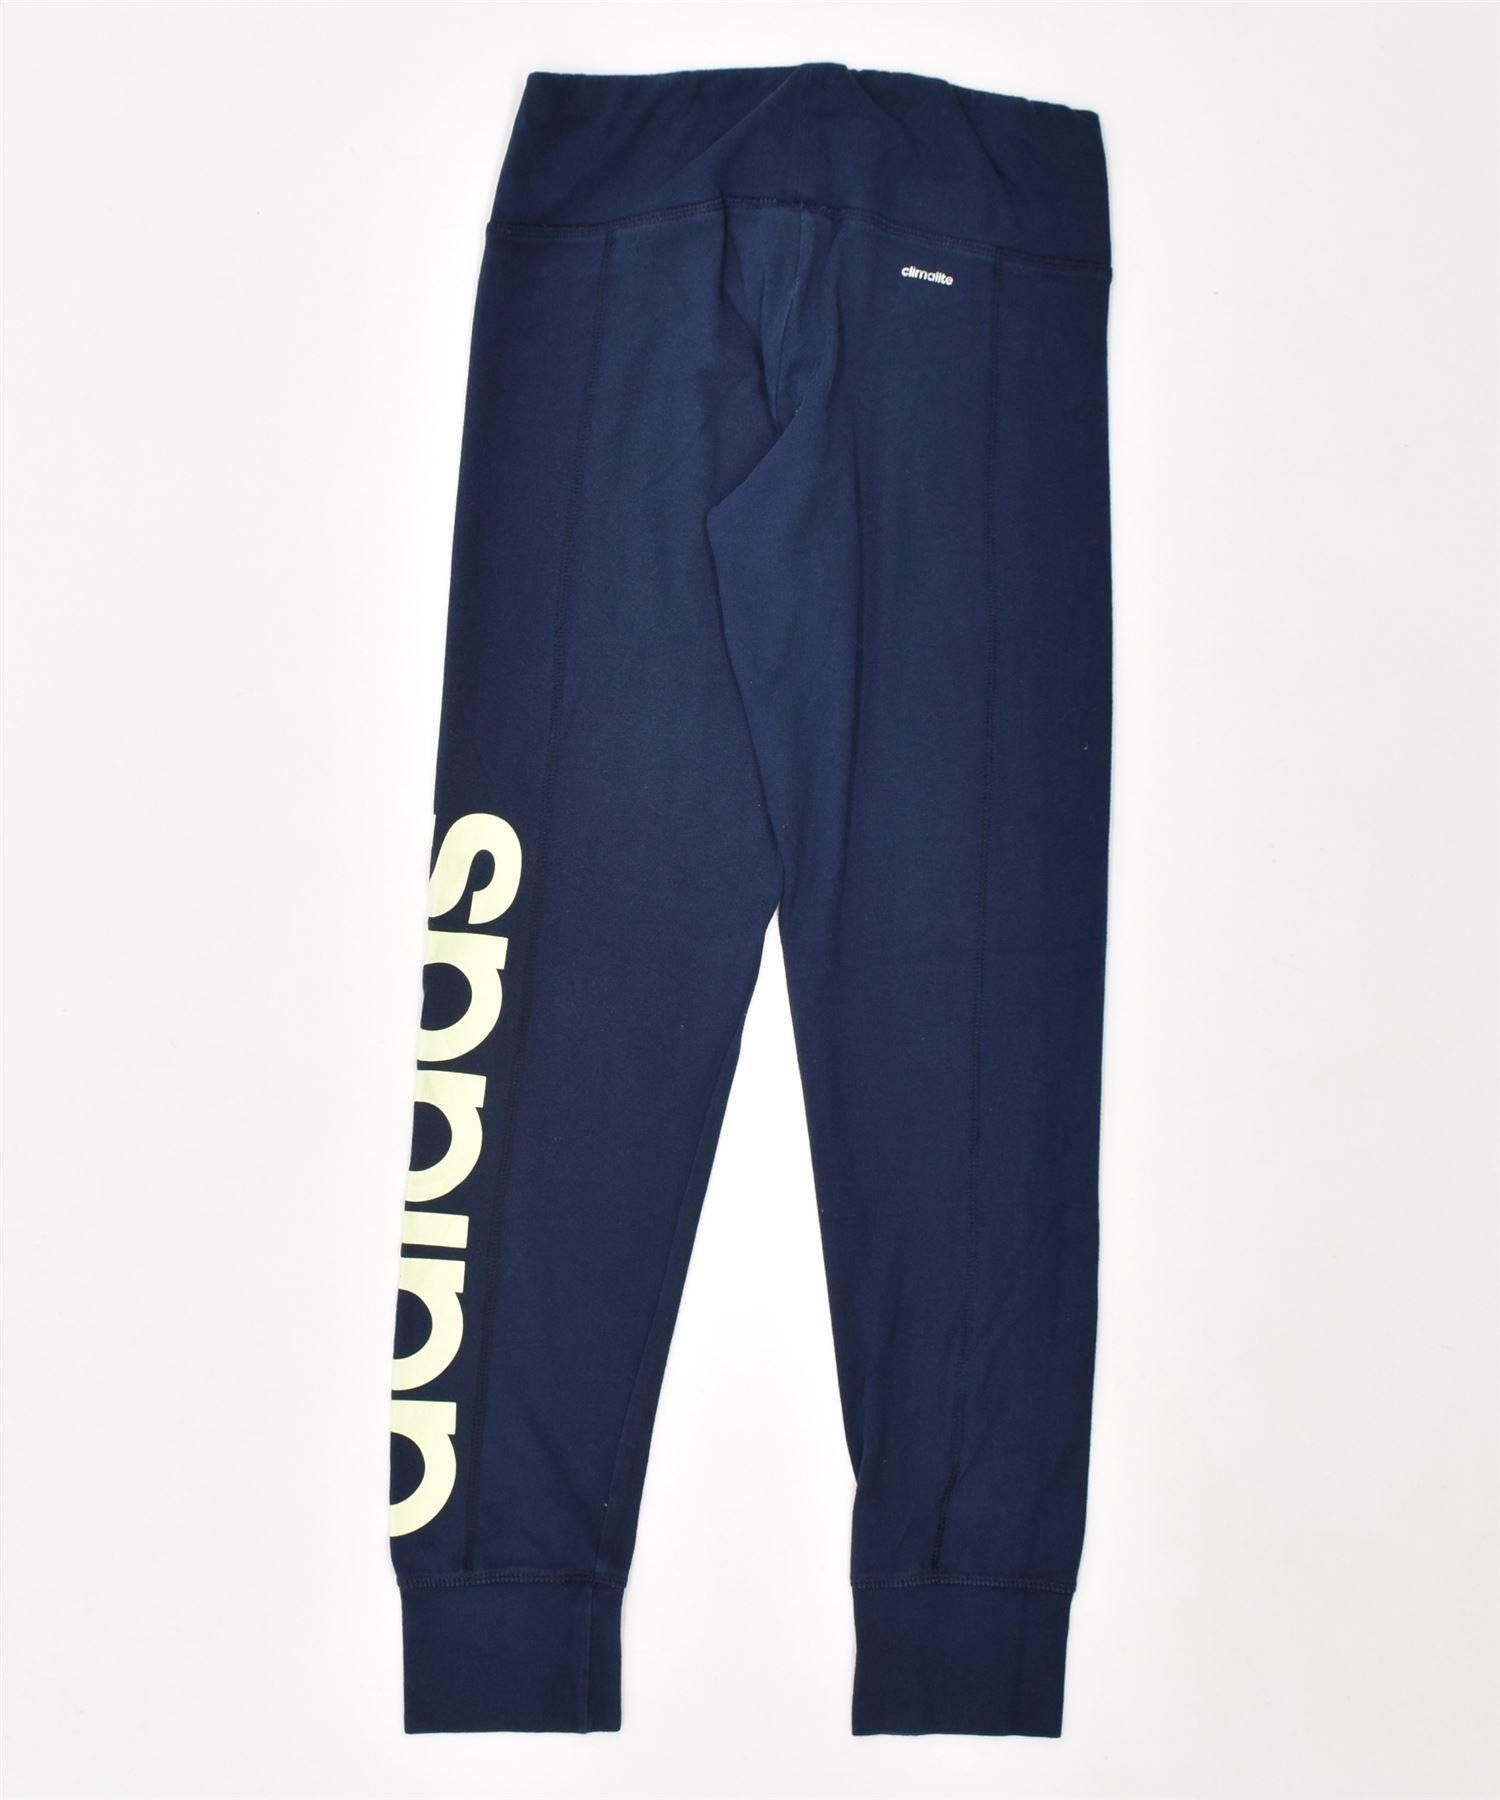 ADIDAS Womens Leggings UK 10 Small Navy Blue Cotton, Vintage & Second-Hand  Clothing Online